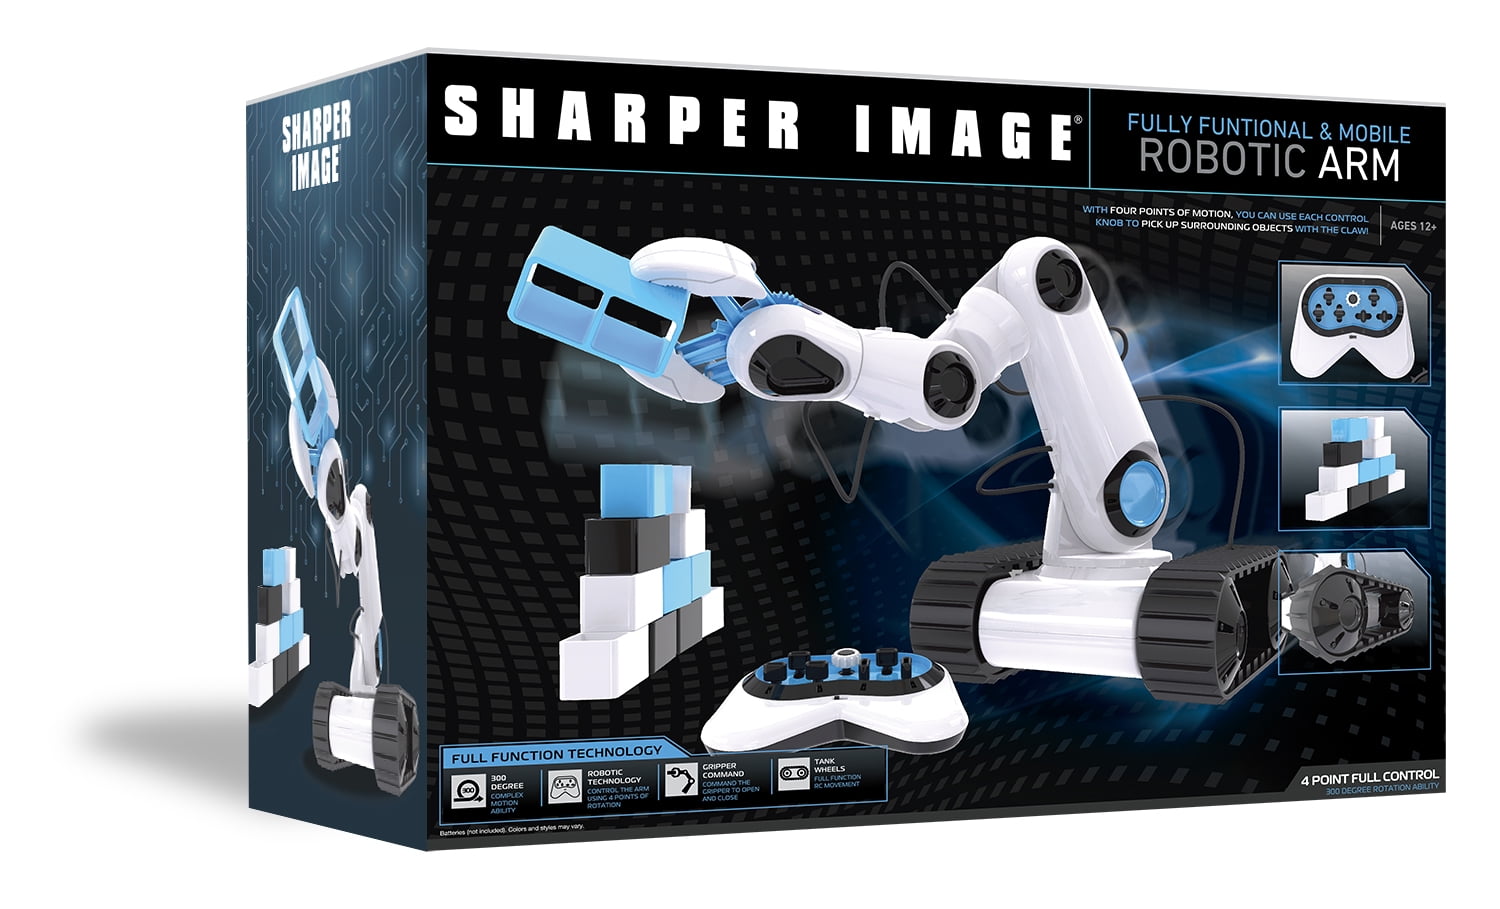 SHARPER IMAGE Full Function Wireless Control Robotic Arm Toy with Spotlight, 